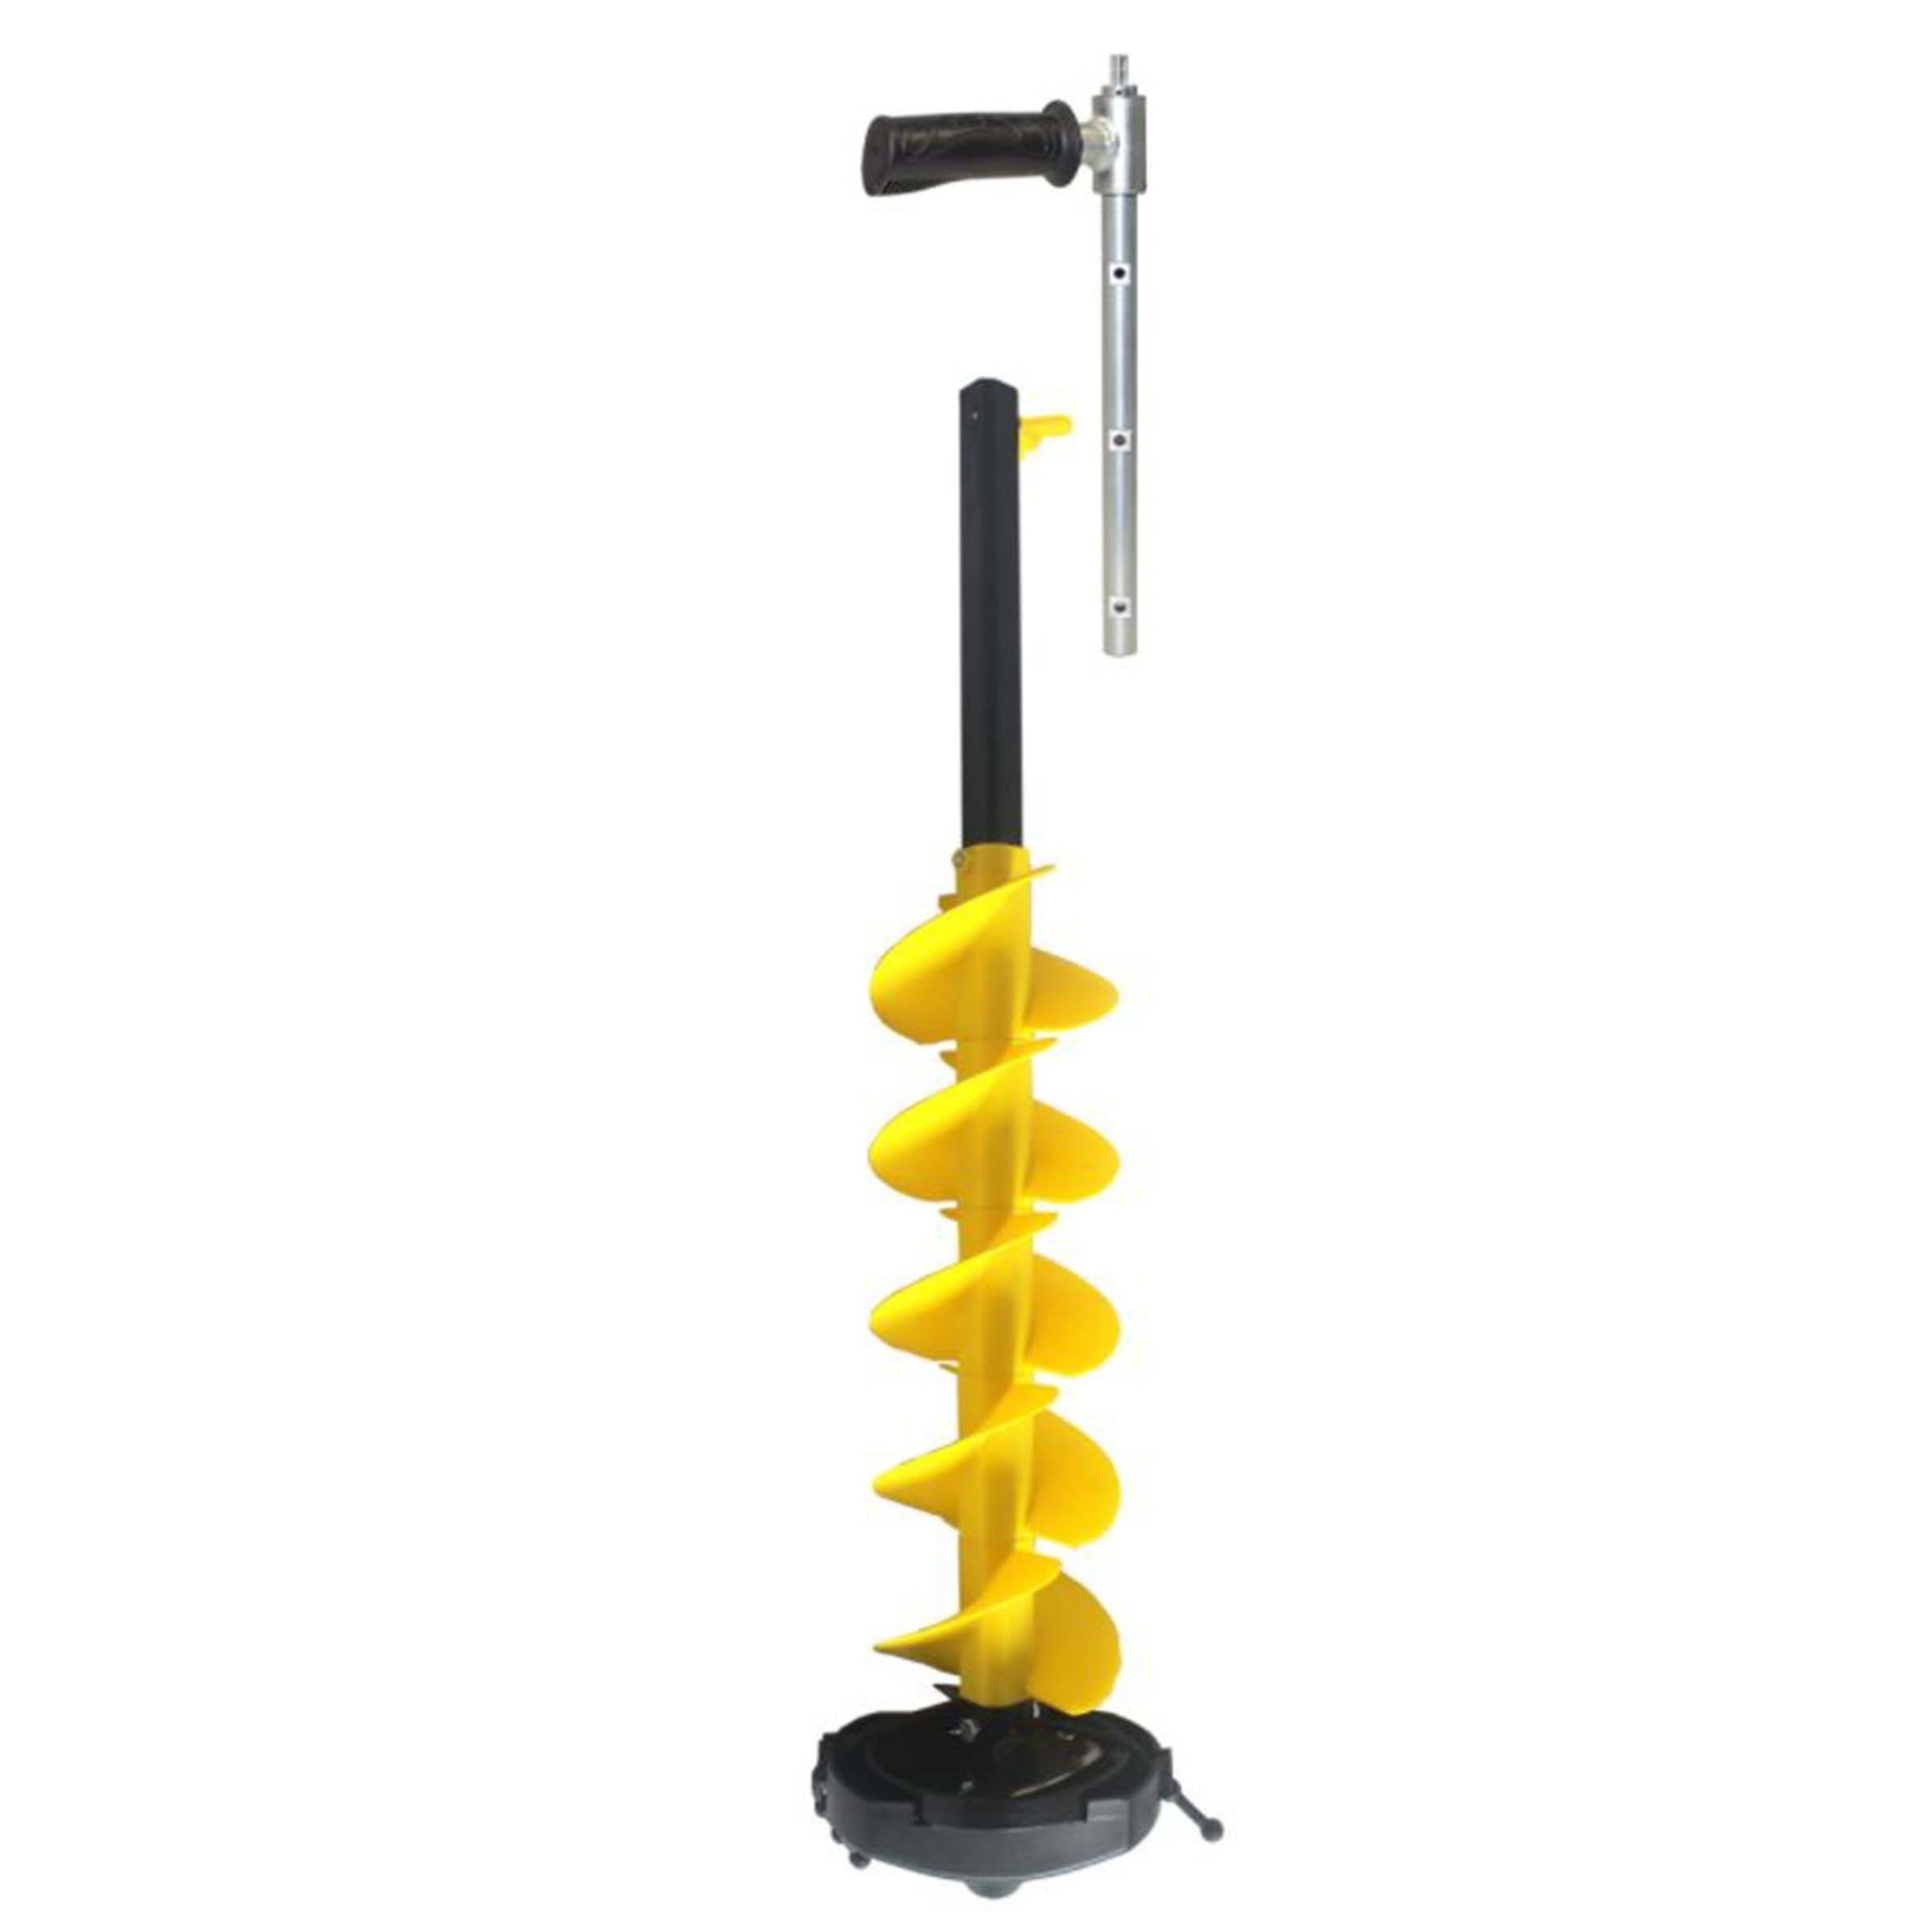 "E-drill" Ice auger - 8 in